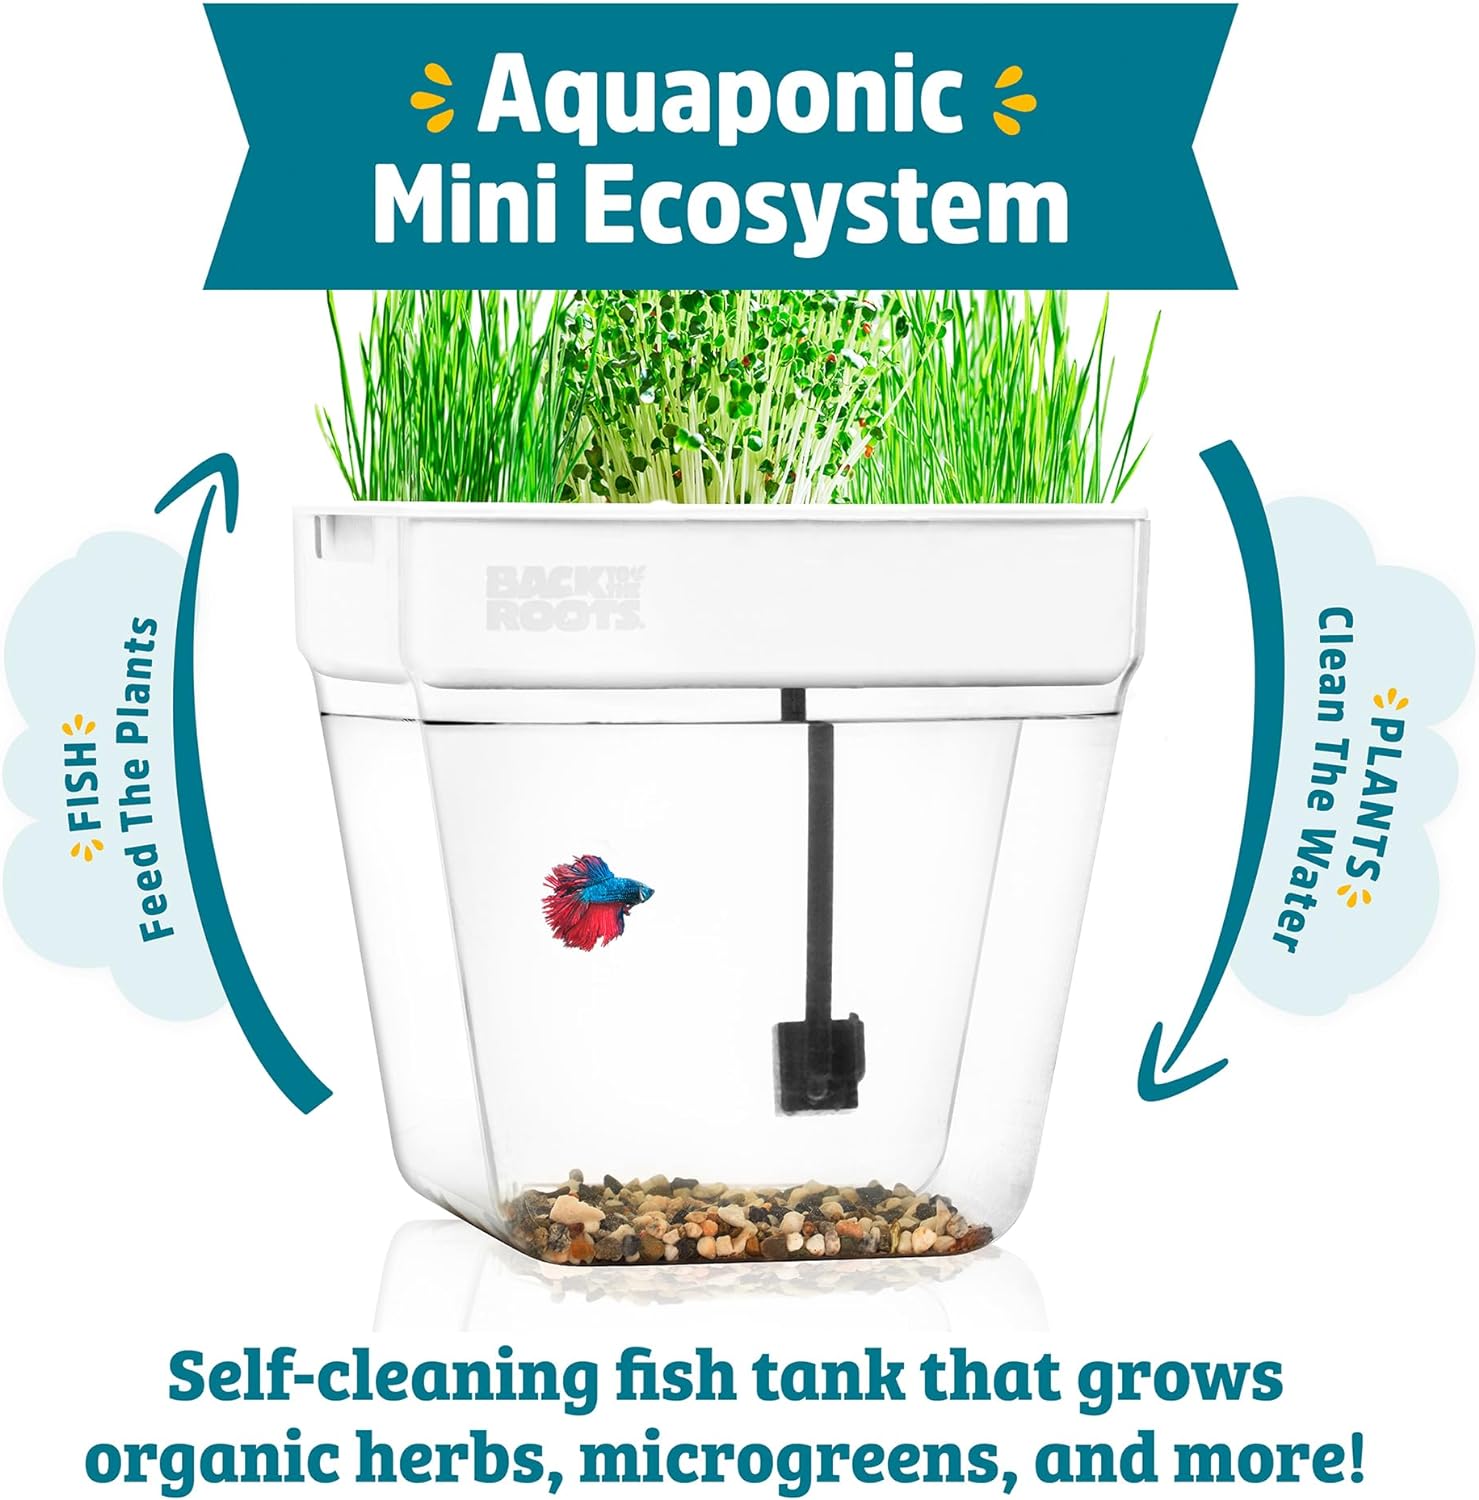 Indoor Aquaponic Garden - 3 Gallon Self Watering, Mess-Free Planter and Self-Cleaning Fishtank for Herbs, Microgreens, Bamboo, Succulents, and Houseplants, Support Fish